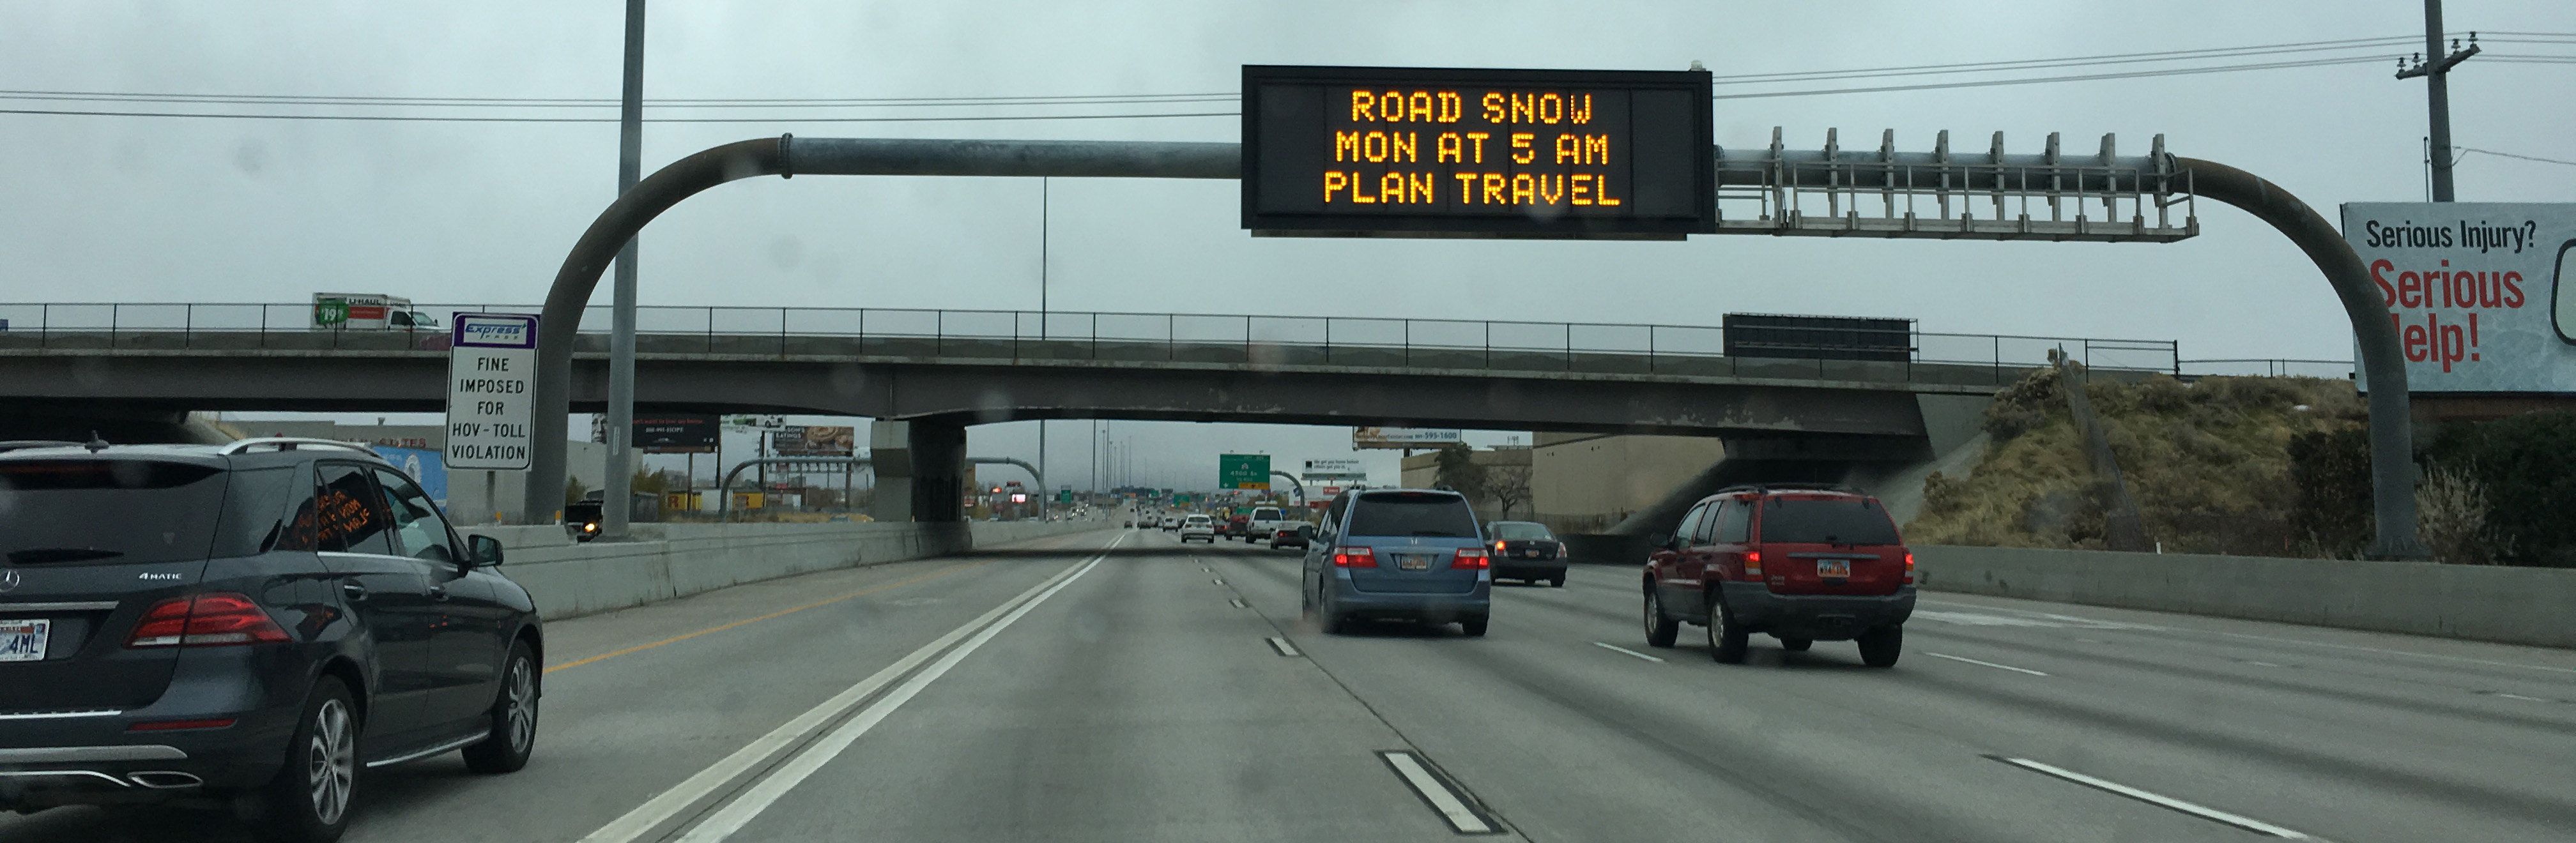 UDOT VMS sign showing "Road snow Mon at 5 am plan travel"